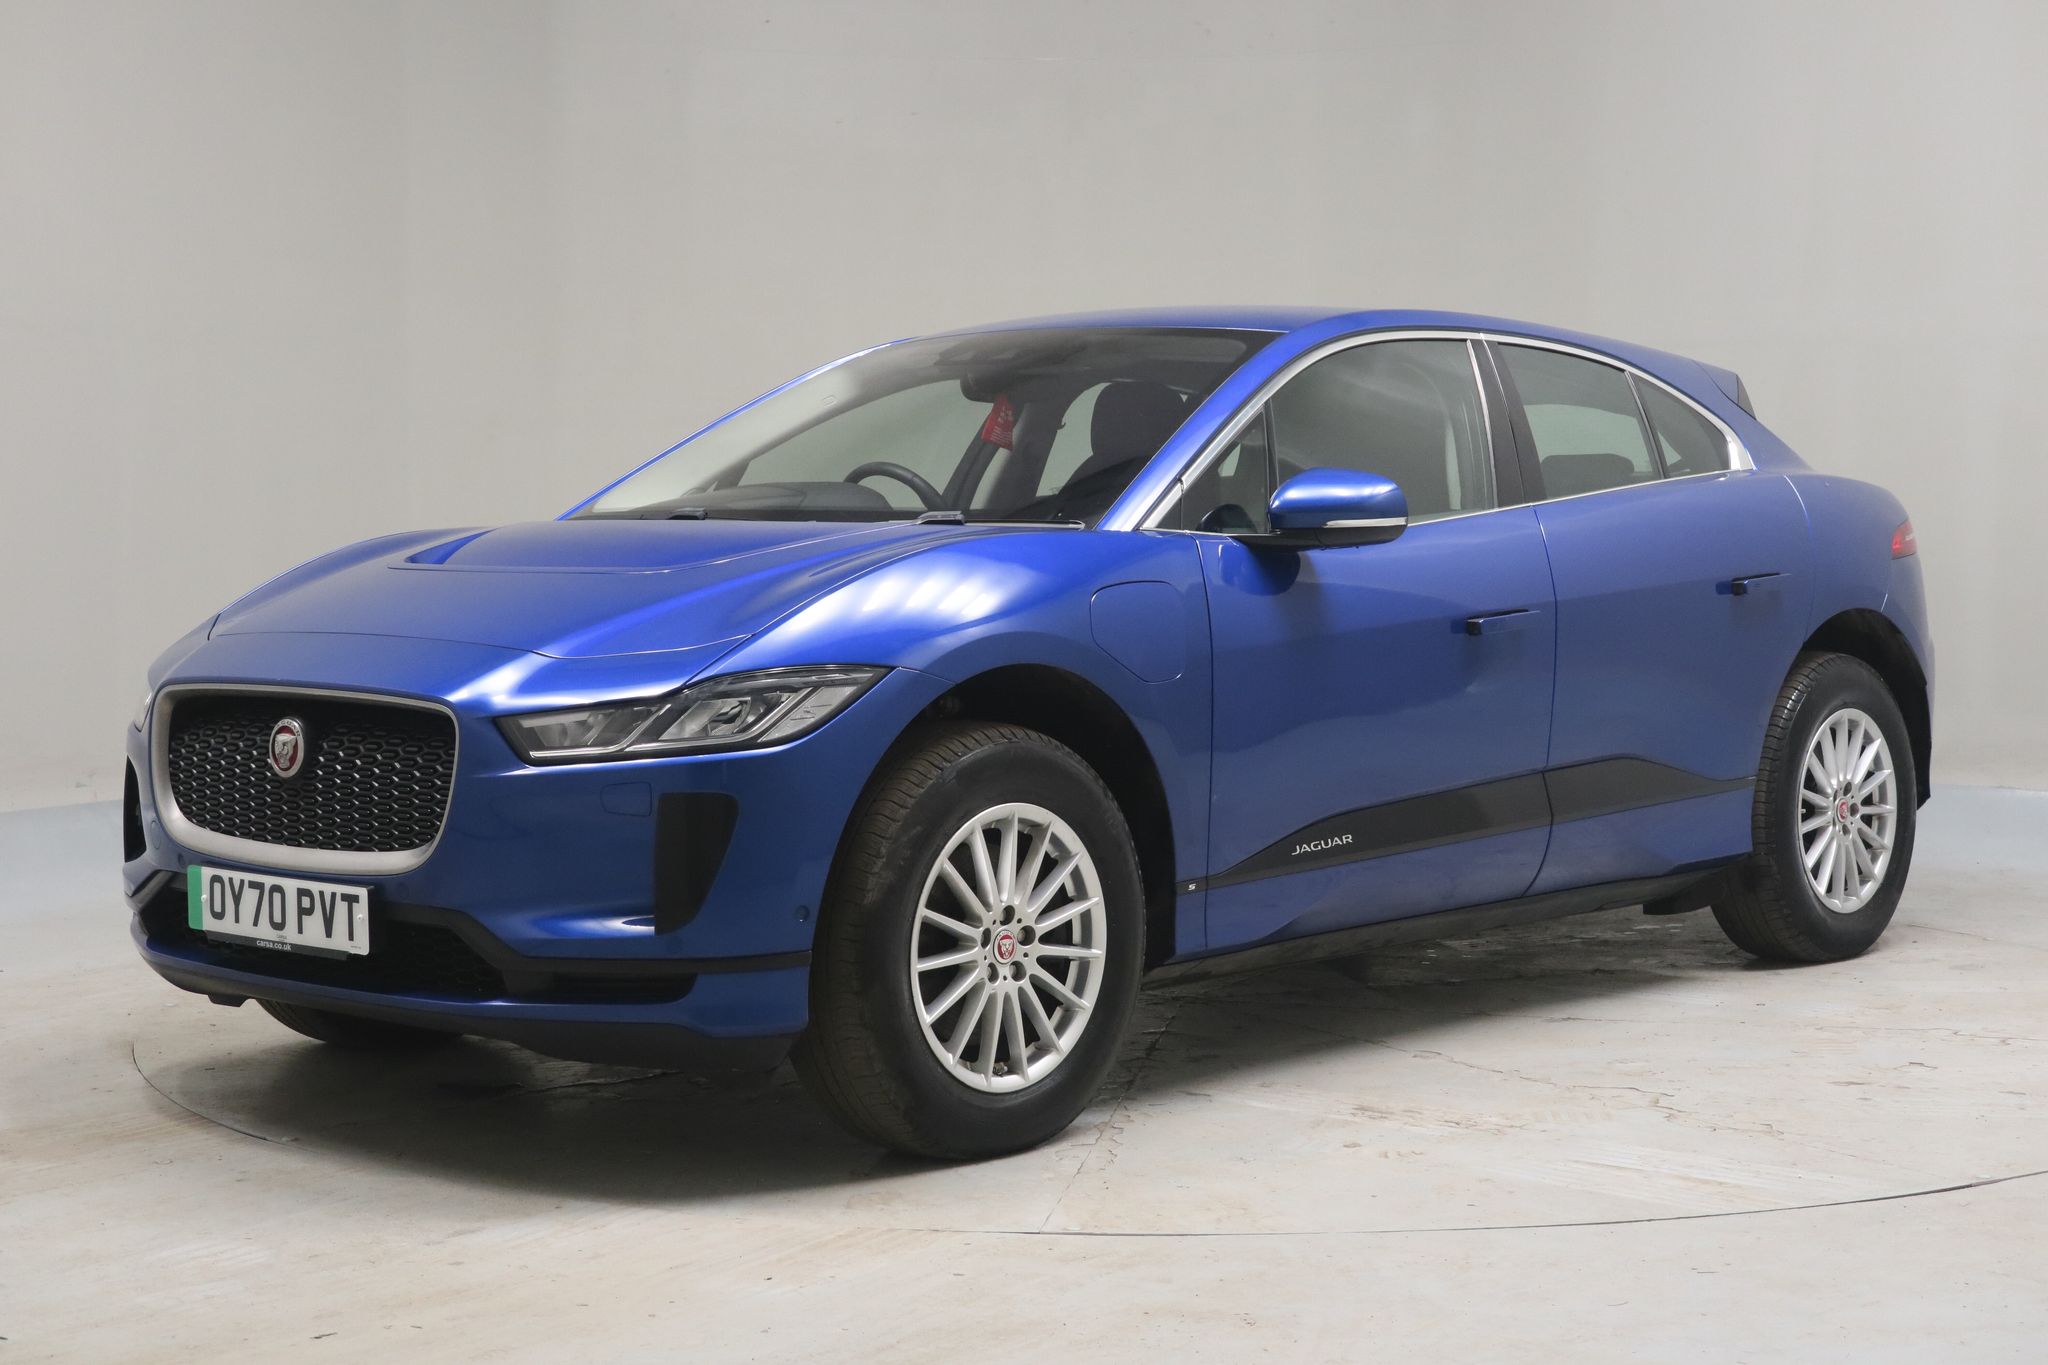 2020 used Jaguar I-PACE 400 90kWh S 4WD (400 ps)